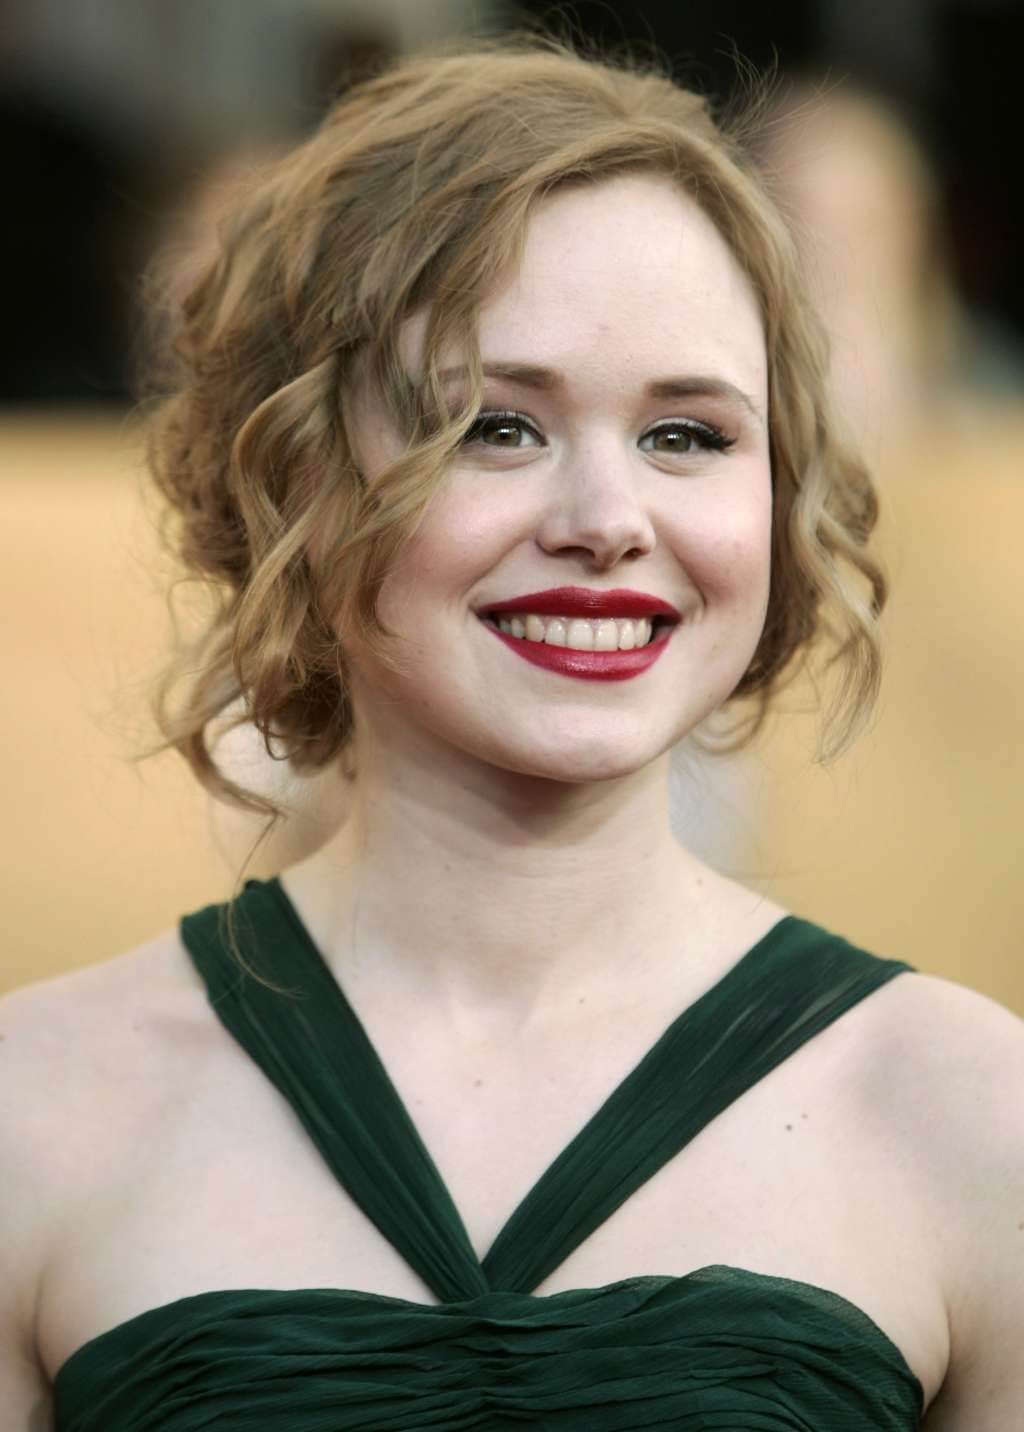 34 Alison Pill Nude Pictures Are Hard To Not Notice Her Beauty 6